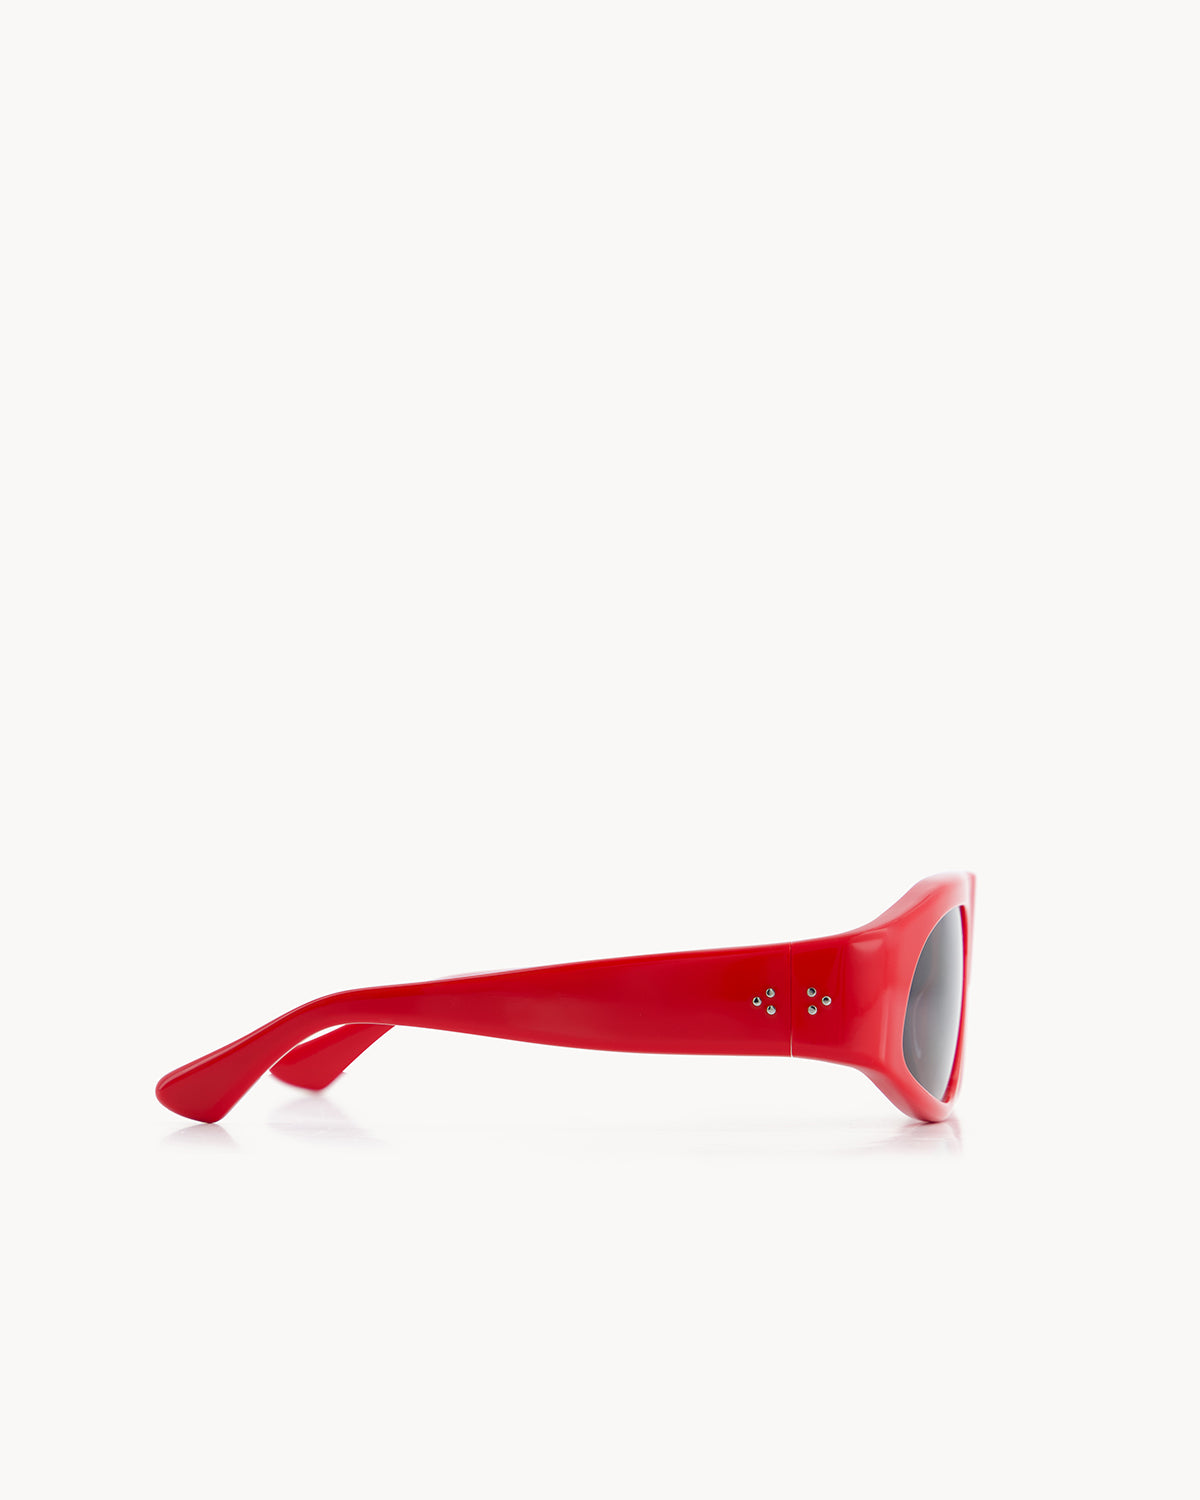 Port Tanger Irfan Sunglasses in Incense Red Acetate and Tobacco Lenses 4